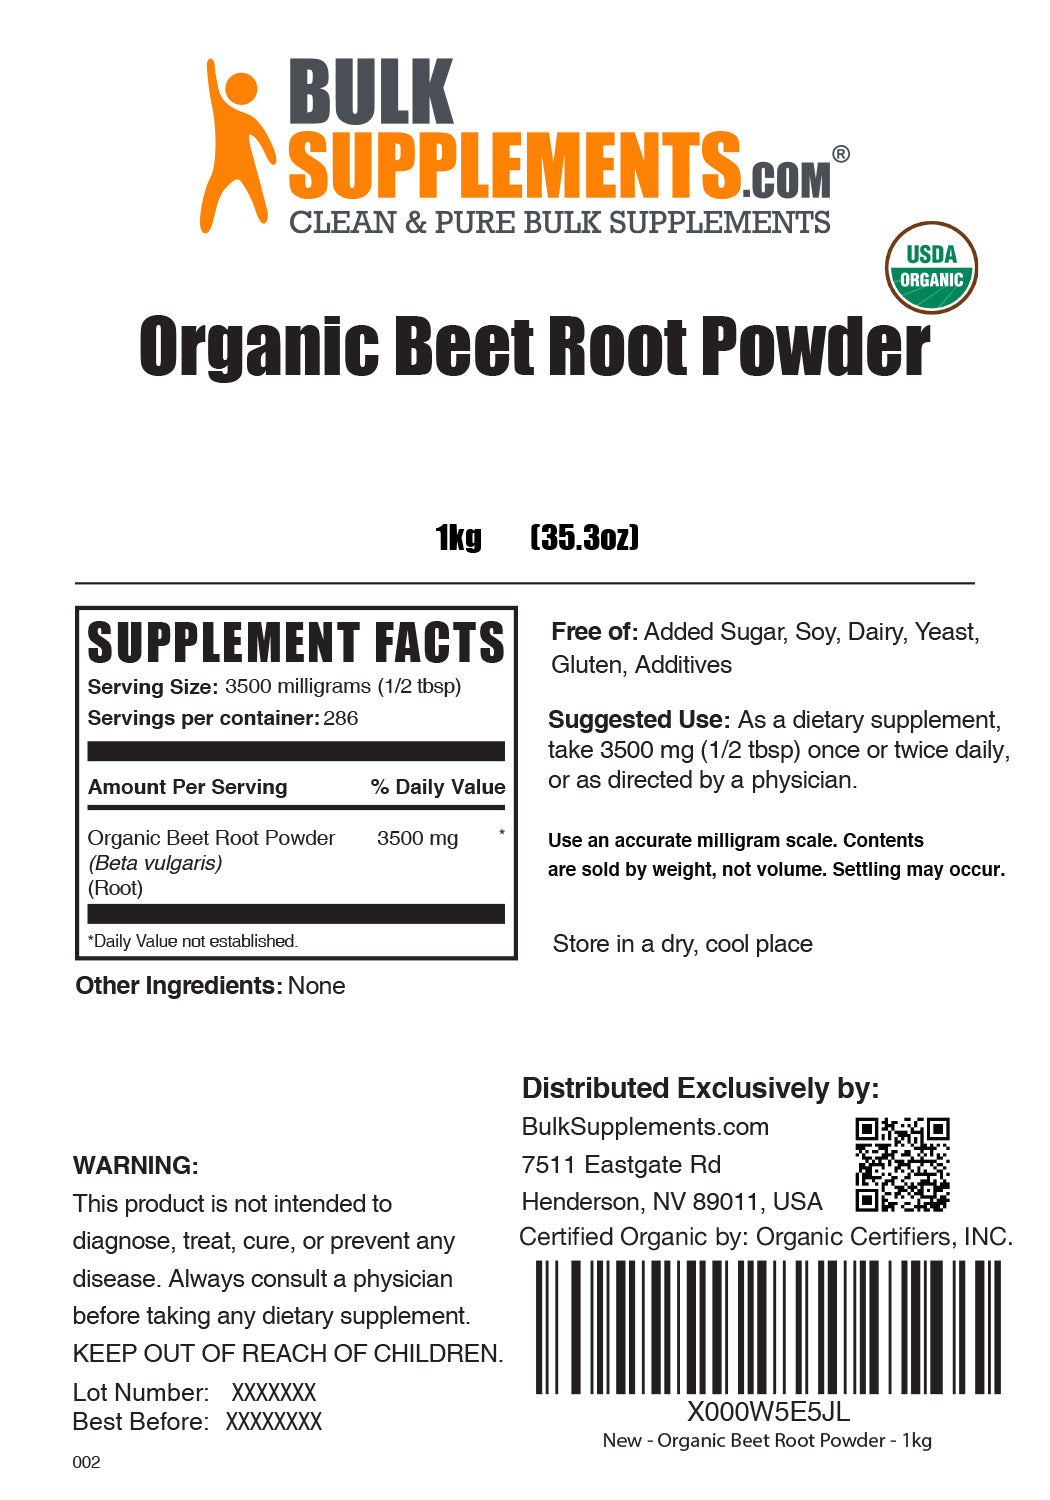 Organic Beet Root Powder Supplement Facts for 1kg bag